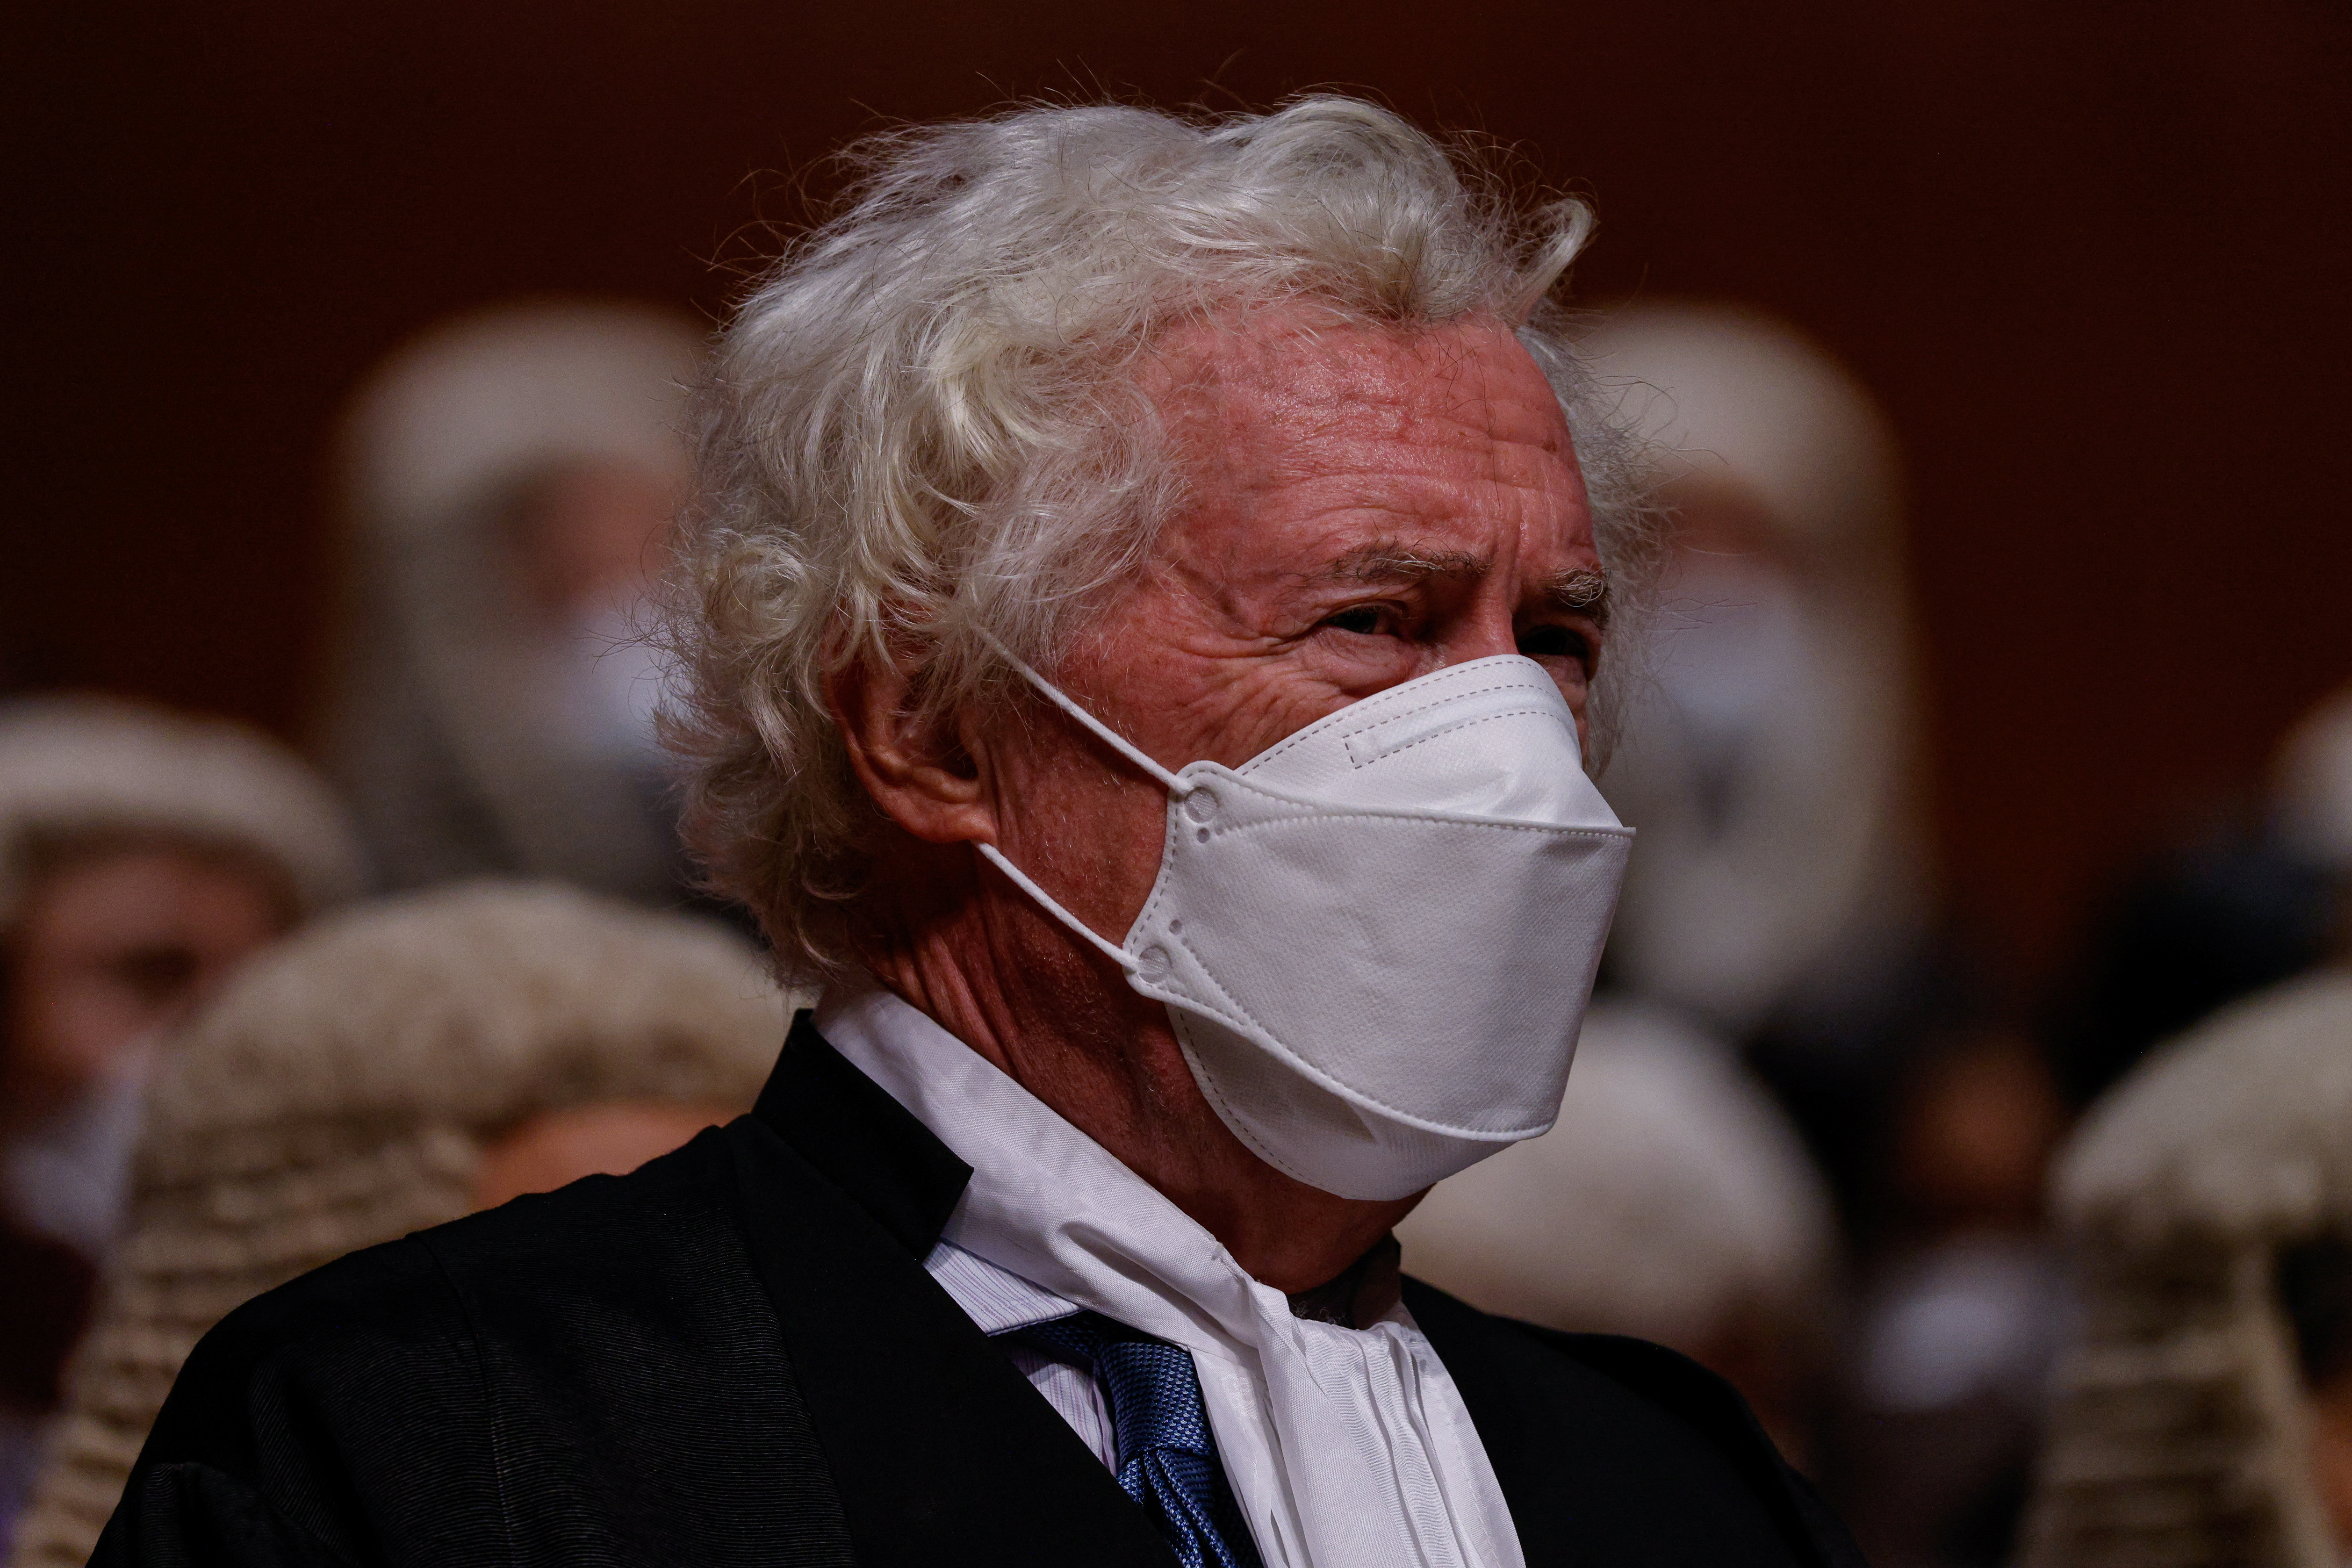 Jonathan Sumption attends a ceremony to mark the beginning of the new legal year in Hong Kong